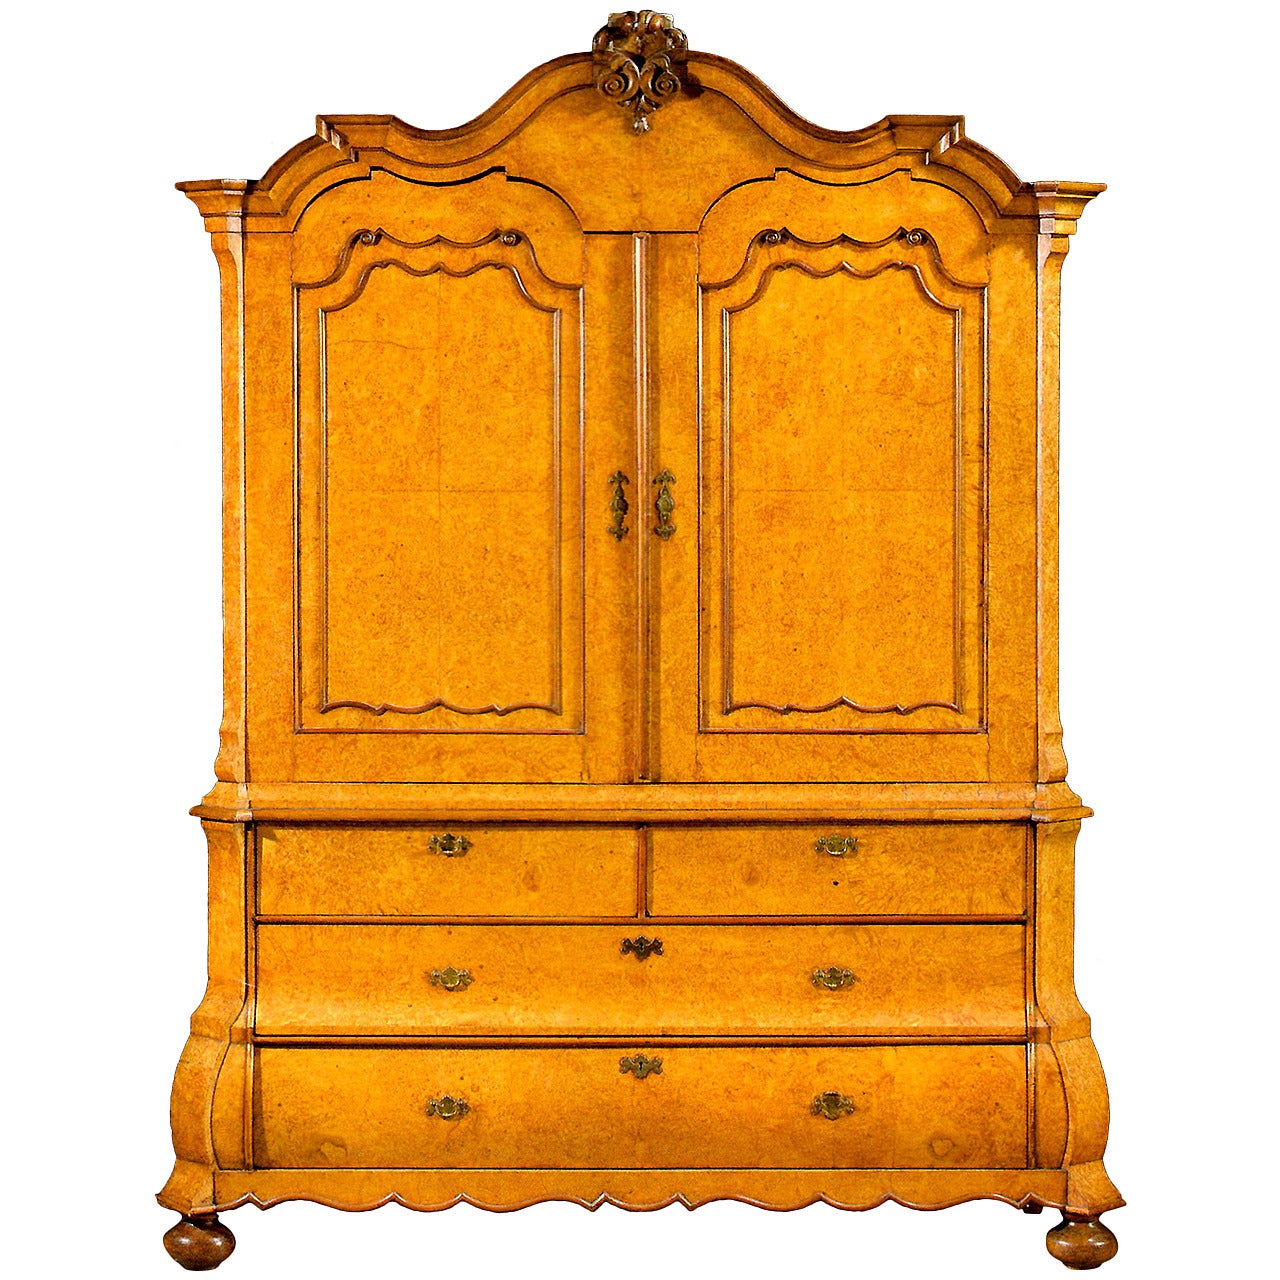 Top Quality and Very Elegant Early 18th Century Amboyna Wood Dutch Cabinet